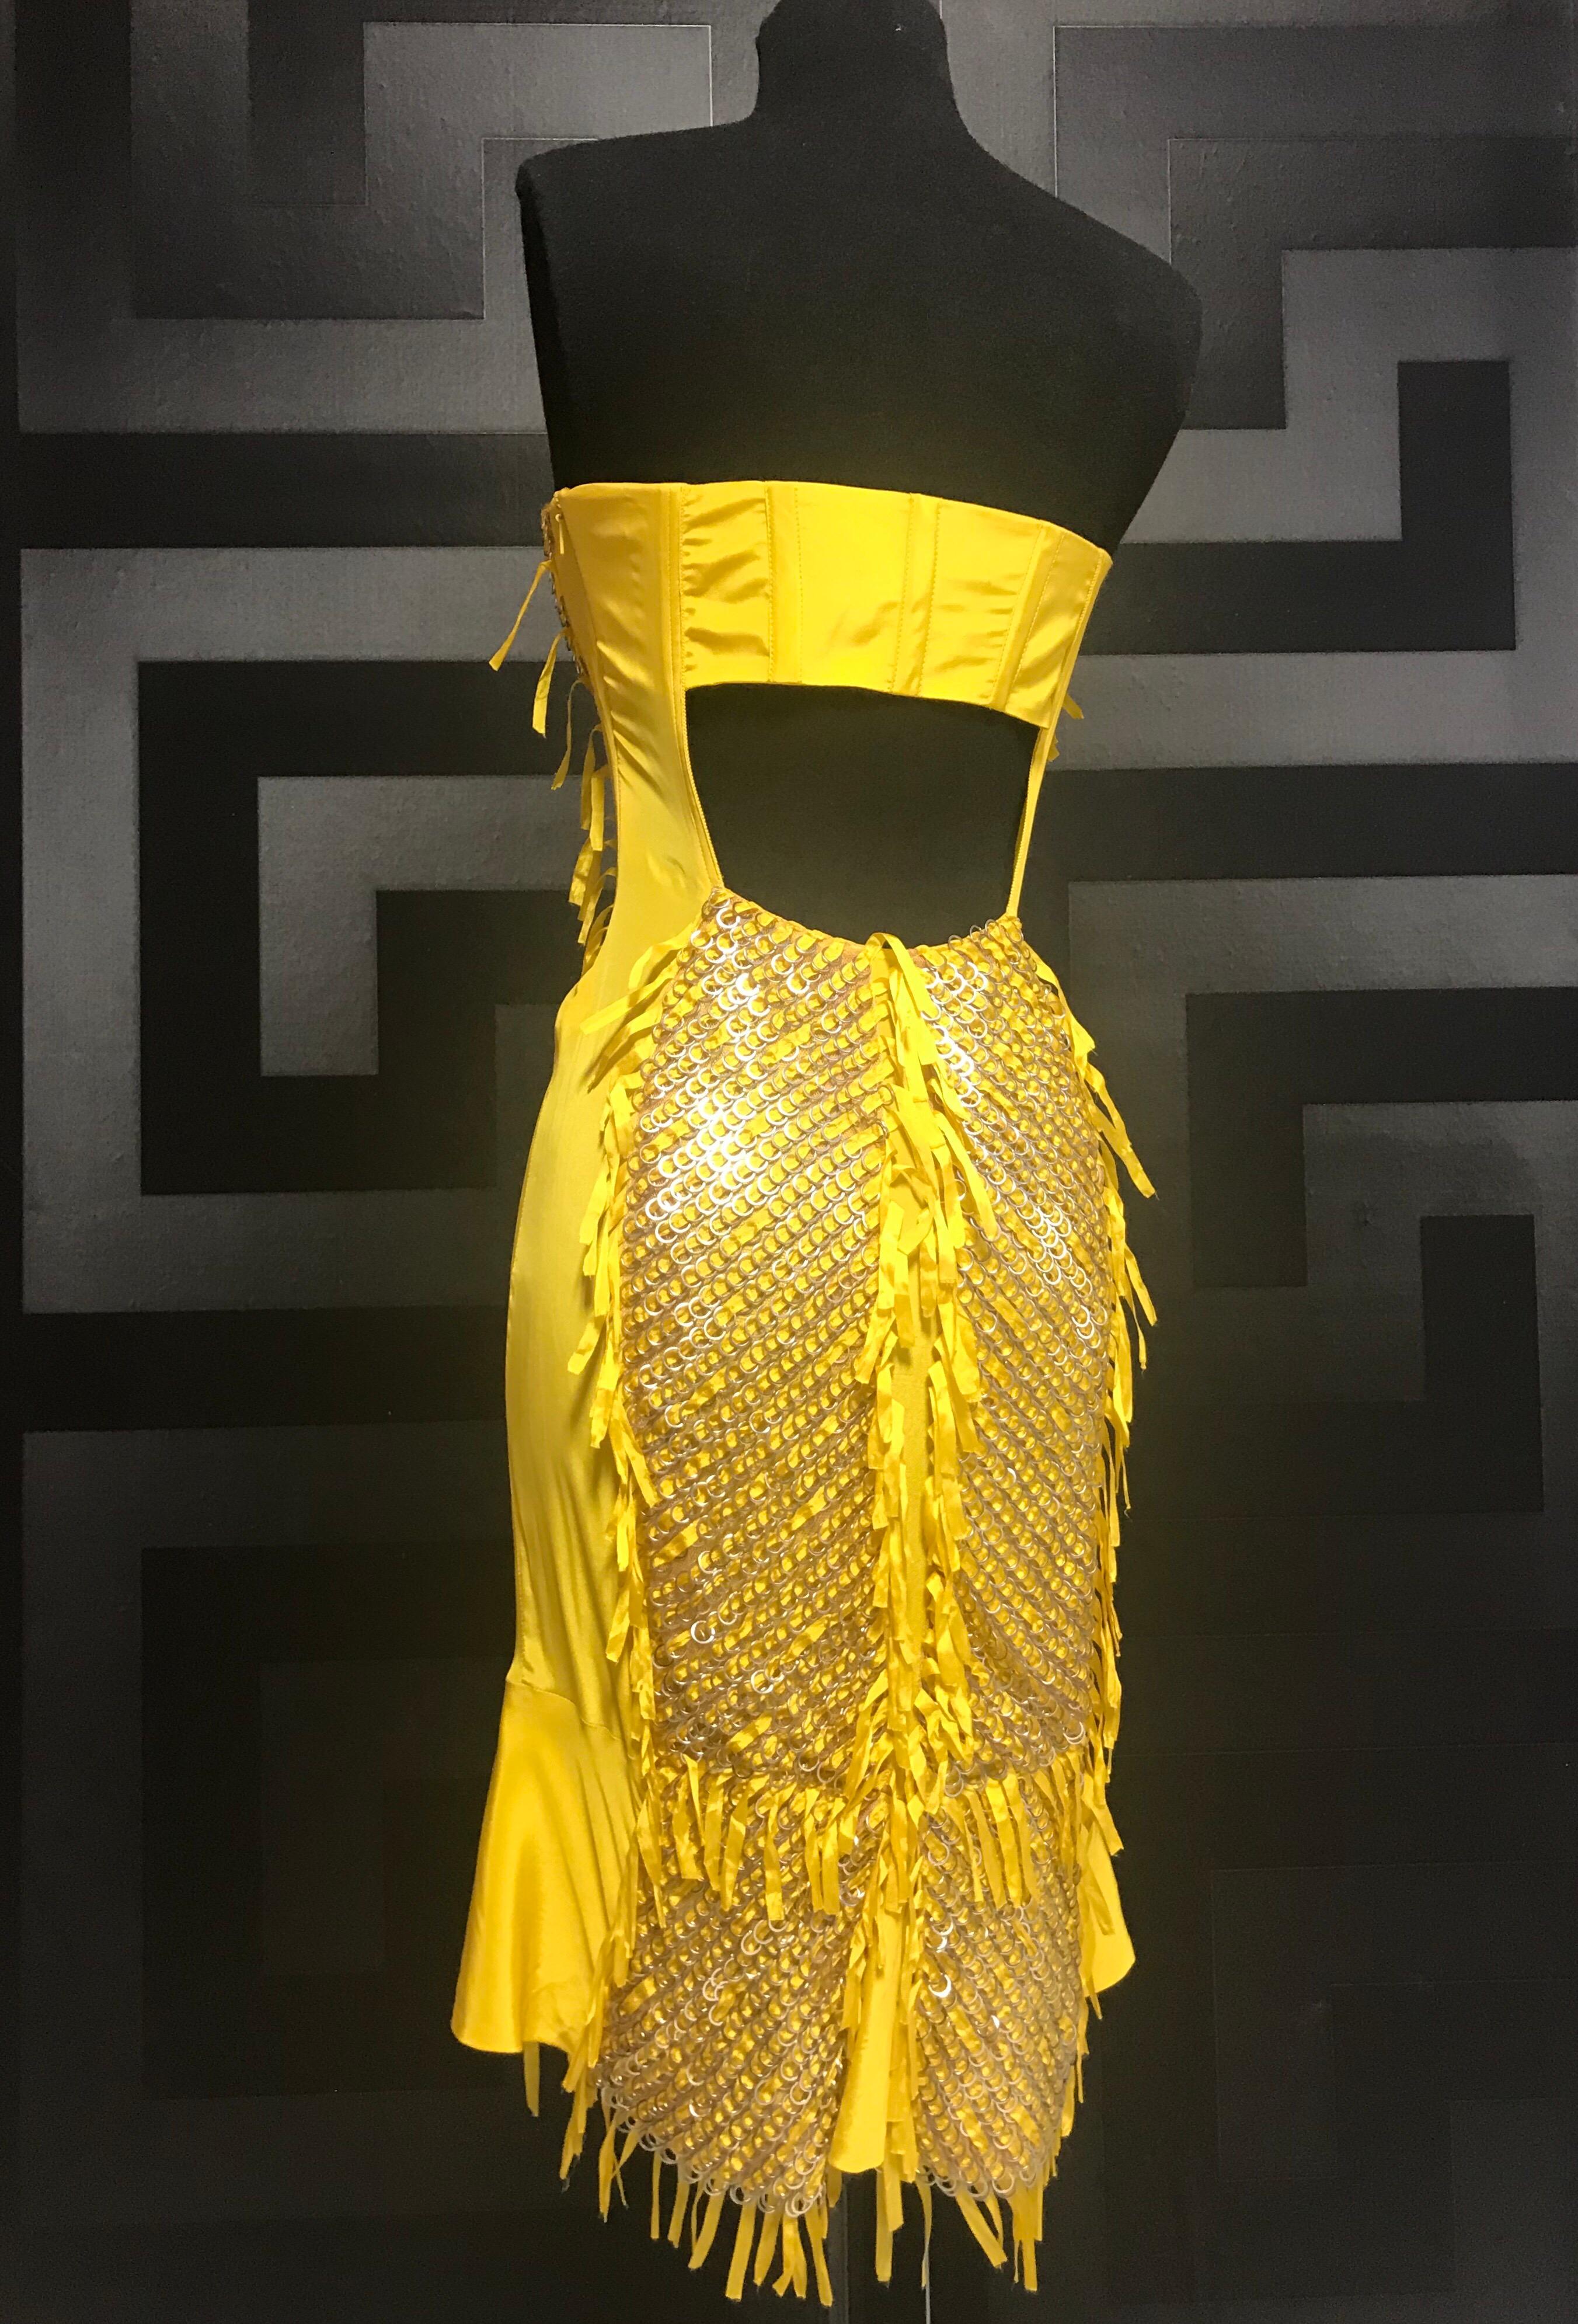 S/S 2004 Tom Ford for Gucci 

Embellished Strapless Silk Dress 
Delicate silk is finished with metal rings laced thru with matching ribbons. 
Side zipper closure.
Boned bodice and cut-out back. 

The dress is featured in Tom Ford Book and it's among